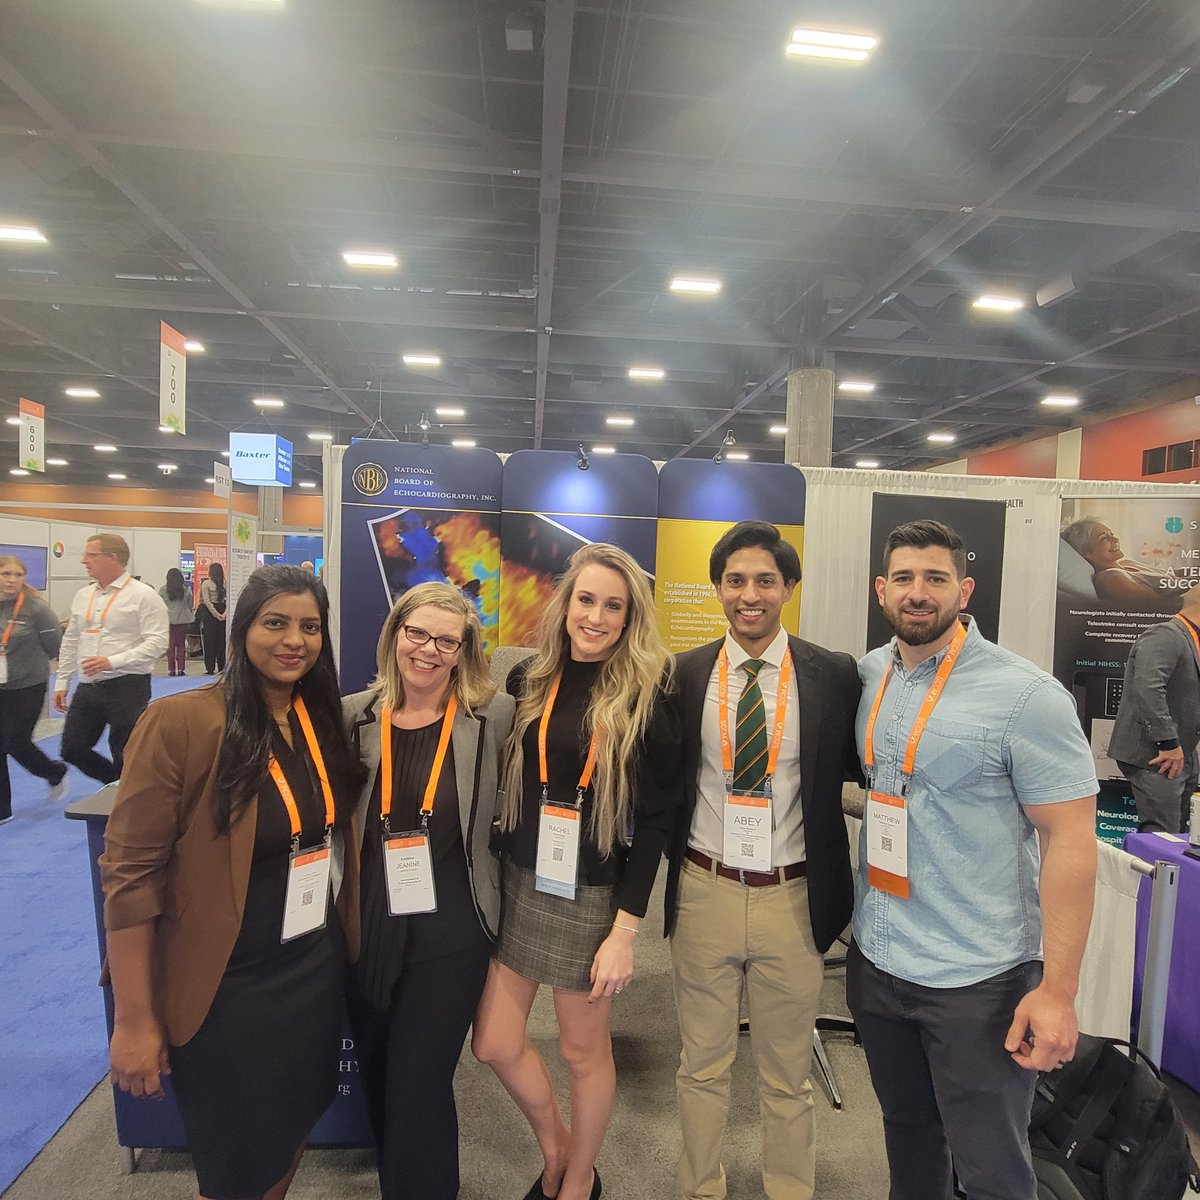 We met the future of NBE with Cleveland Clinic Critical Care Fellows! They are learning lots from @ChrisTroianos & @NSkubas from our Board and taking the CCEeXAM in the next years. @SCCM @ClevelandClinic #sccm